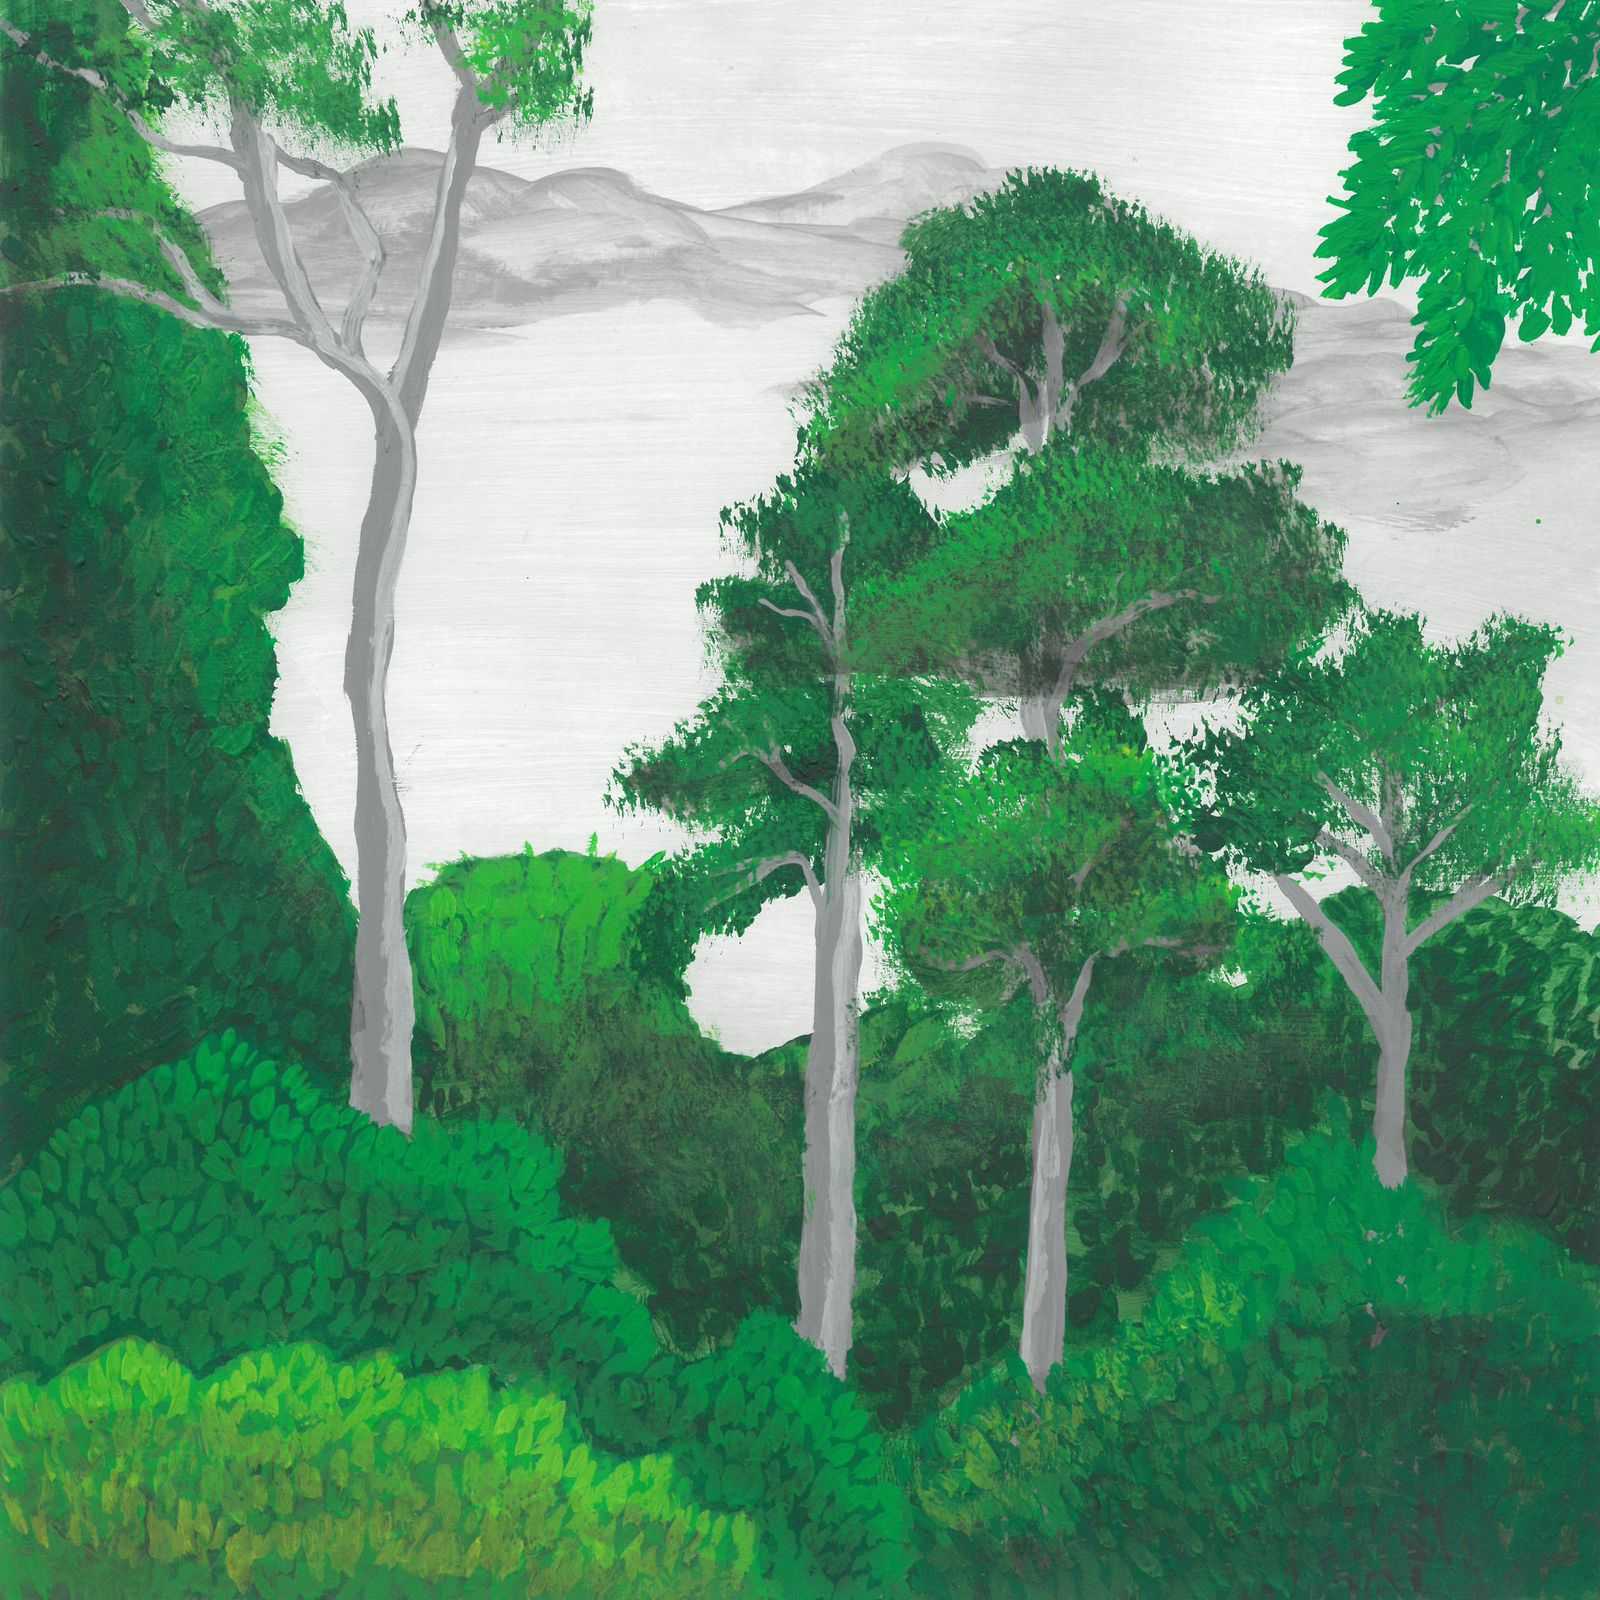 Fascinating birdsong in the Congo rainforest - nature landscape painting - earth.fm